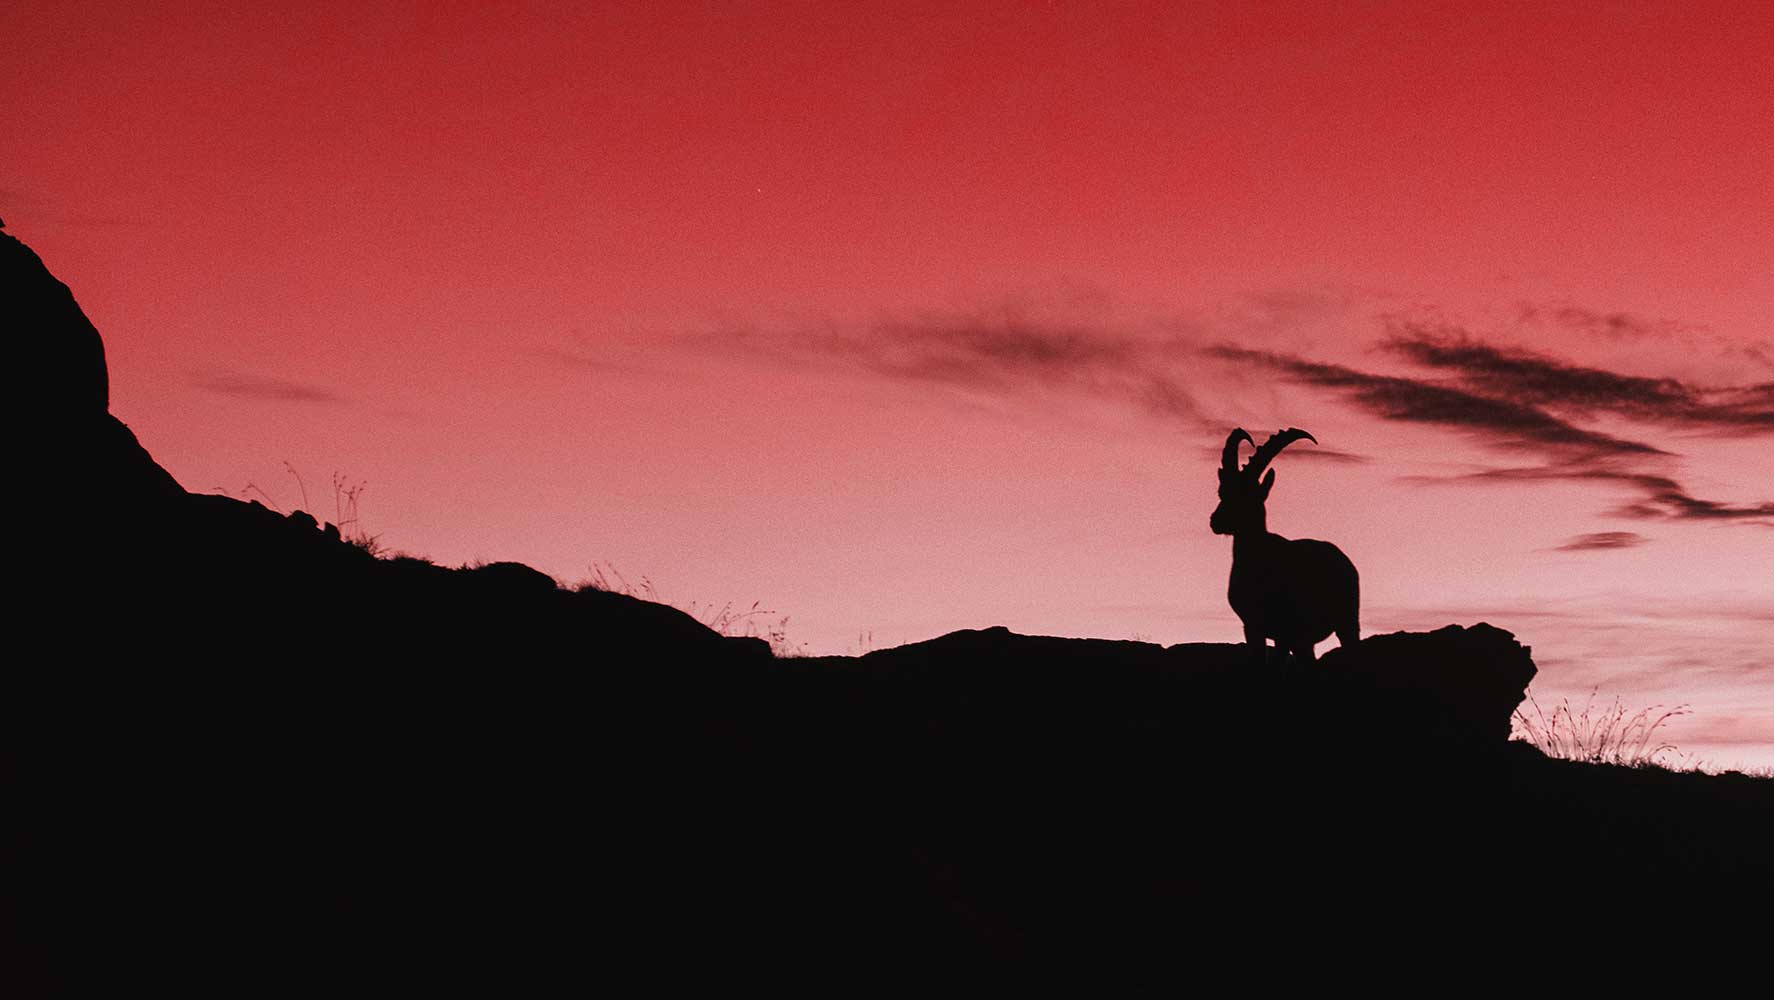 Goat on a hill at dusk